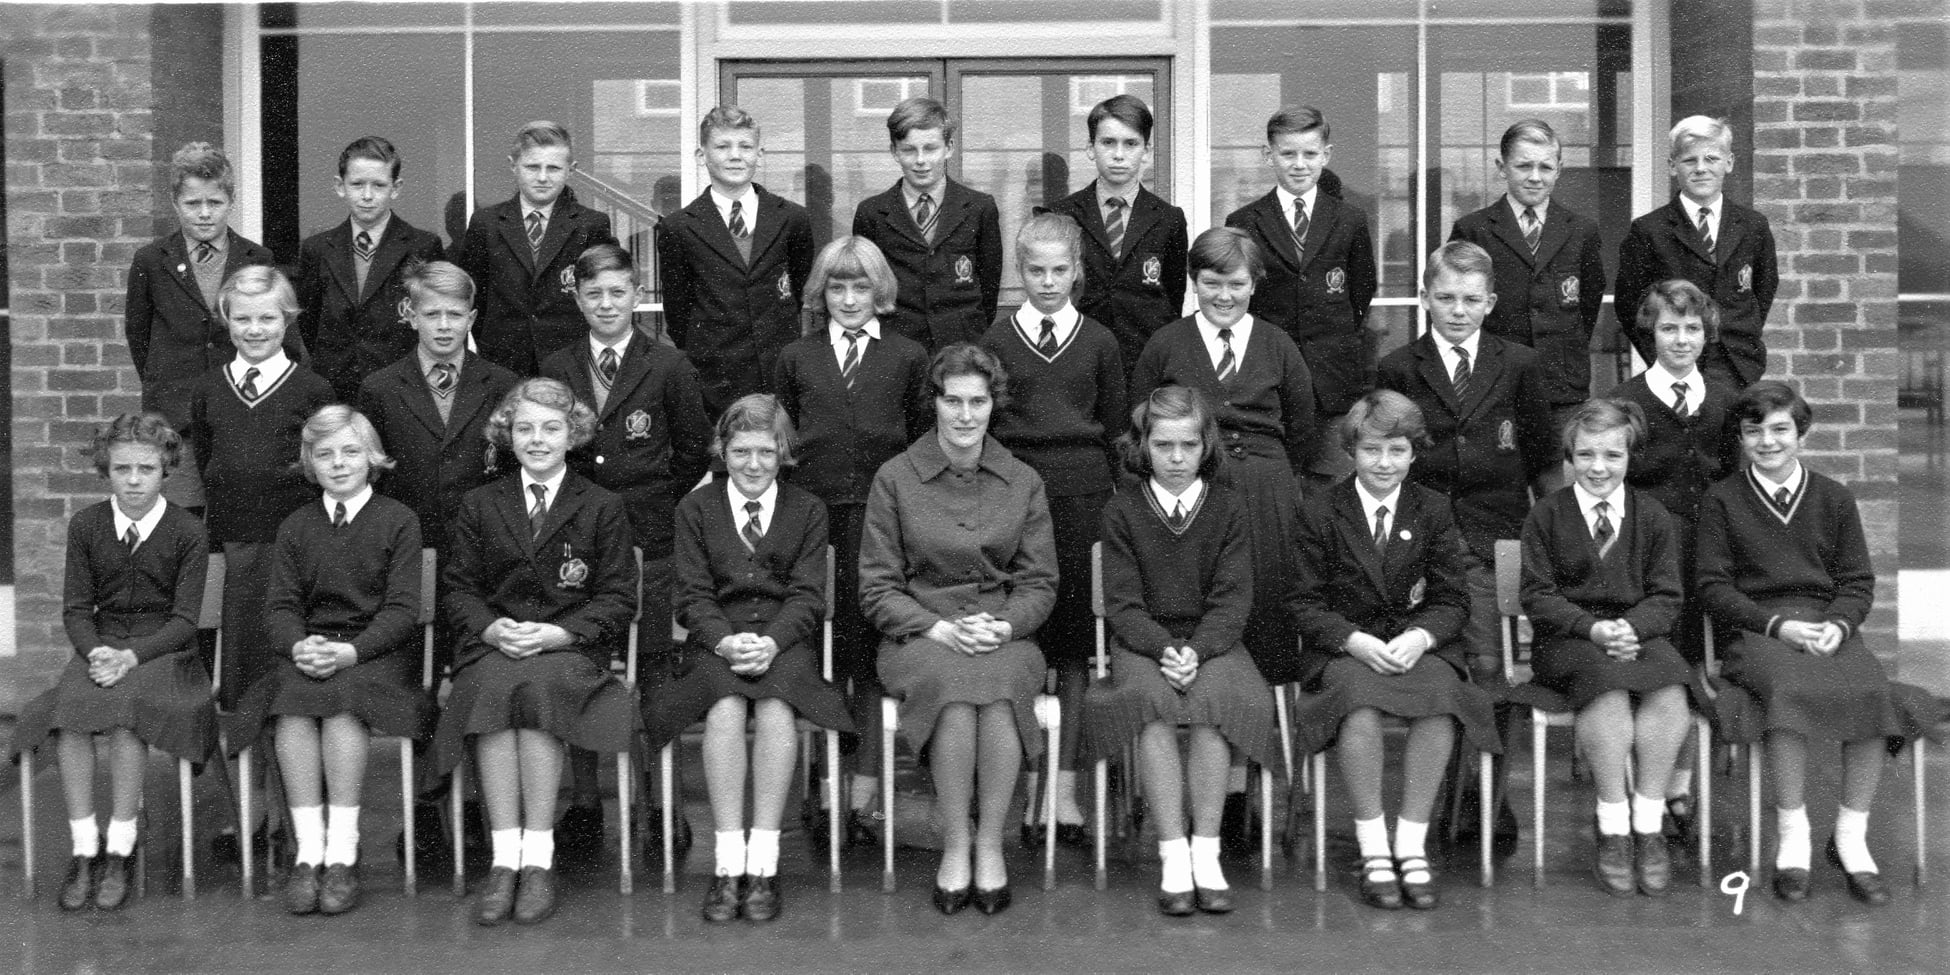 Withernsea High School 1960 class 1A